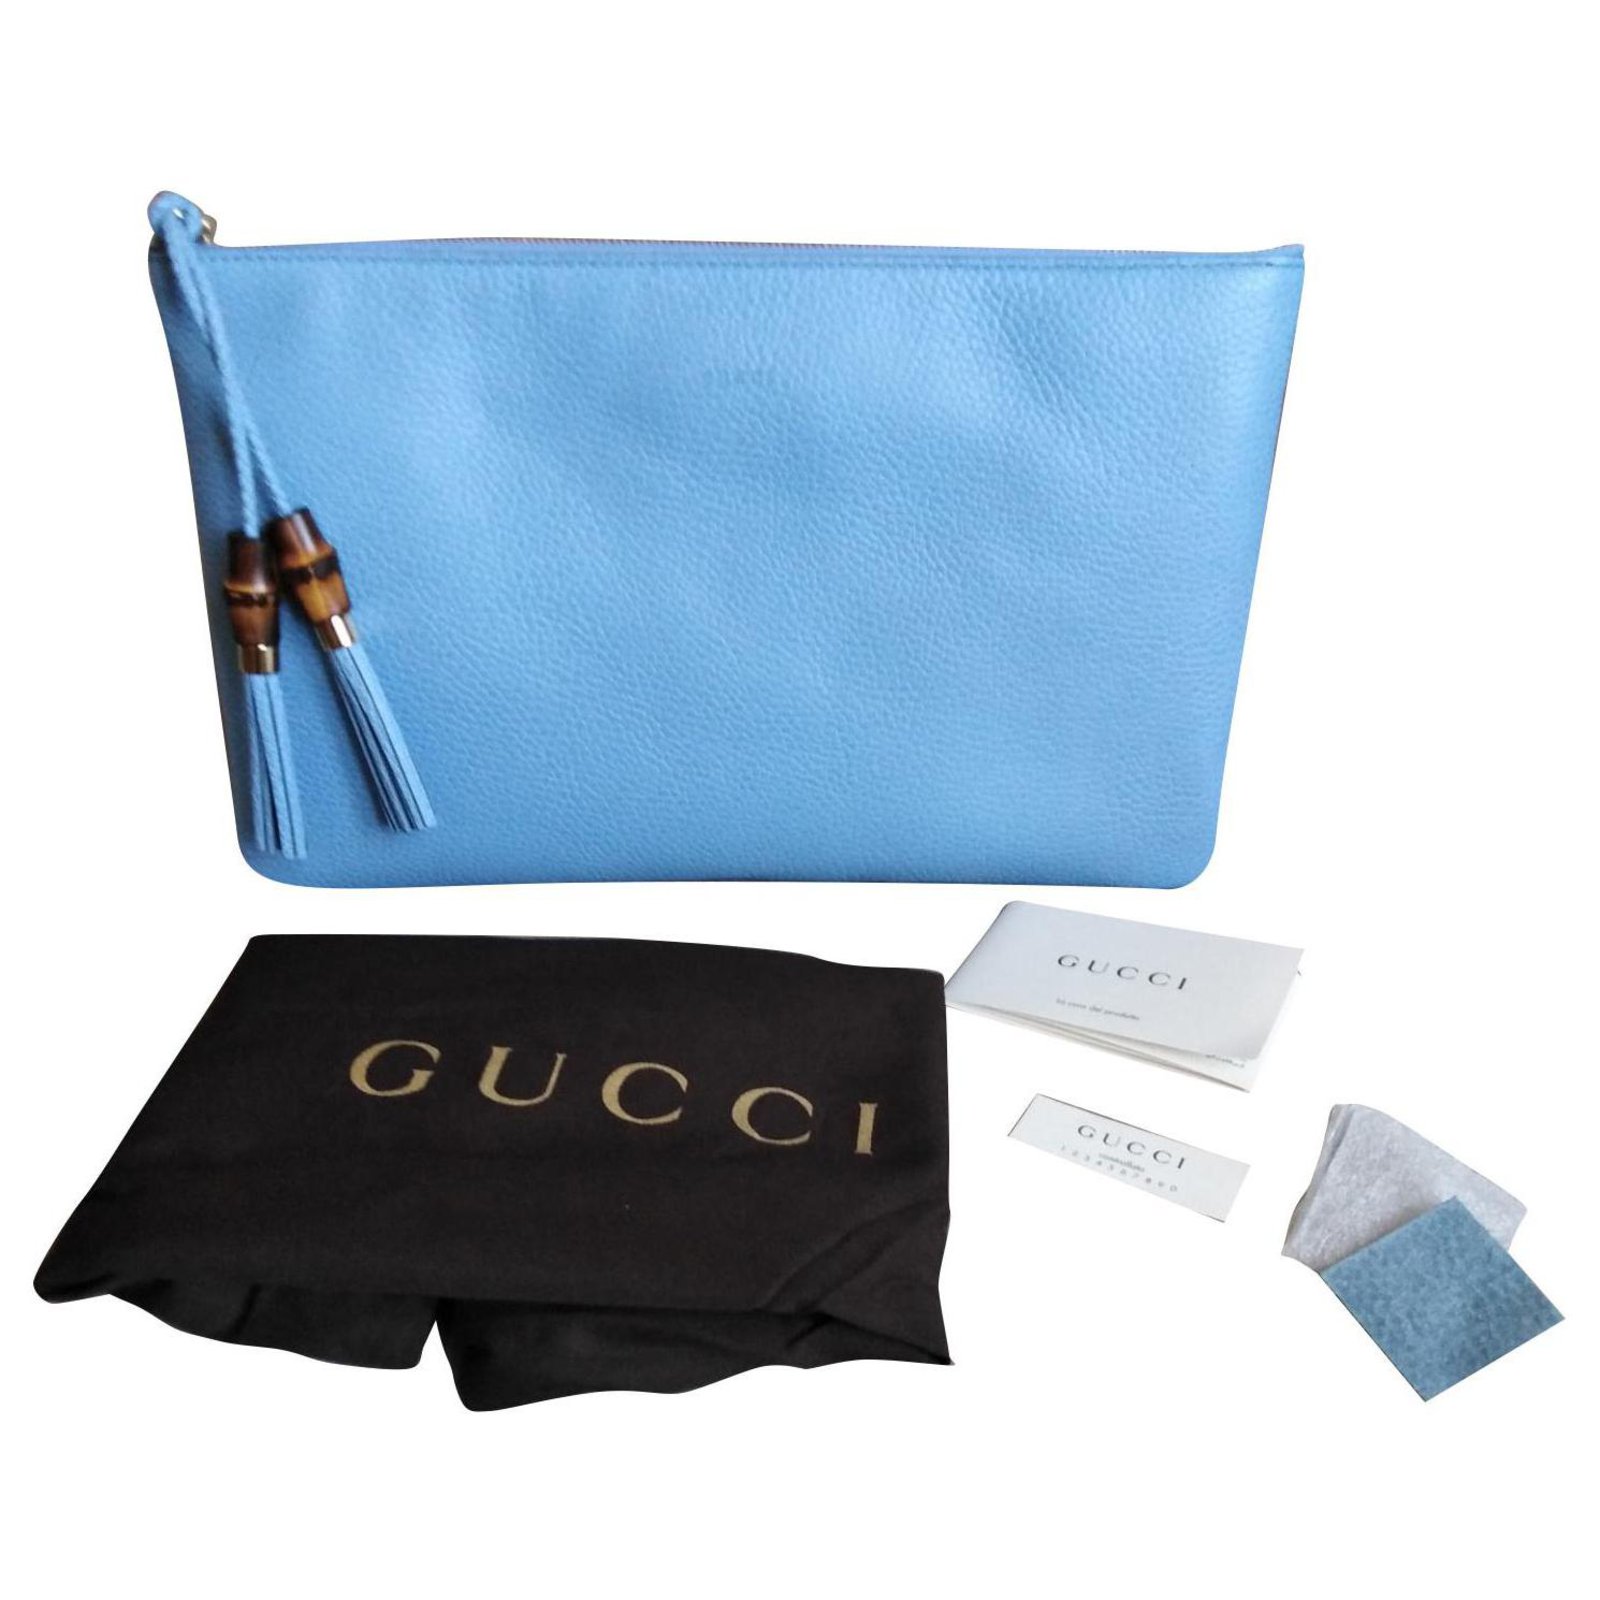 Gucci Bamboo Clutch bags Leather Light 